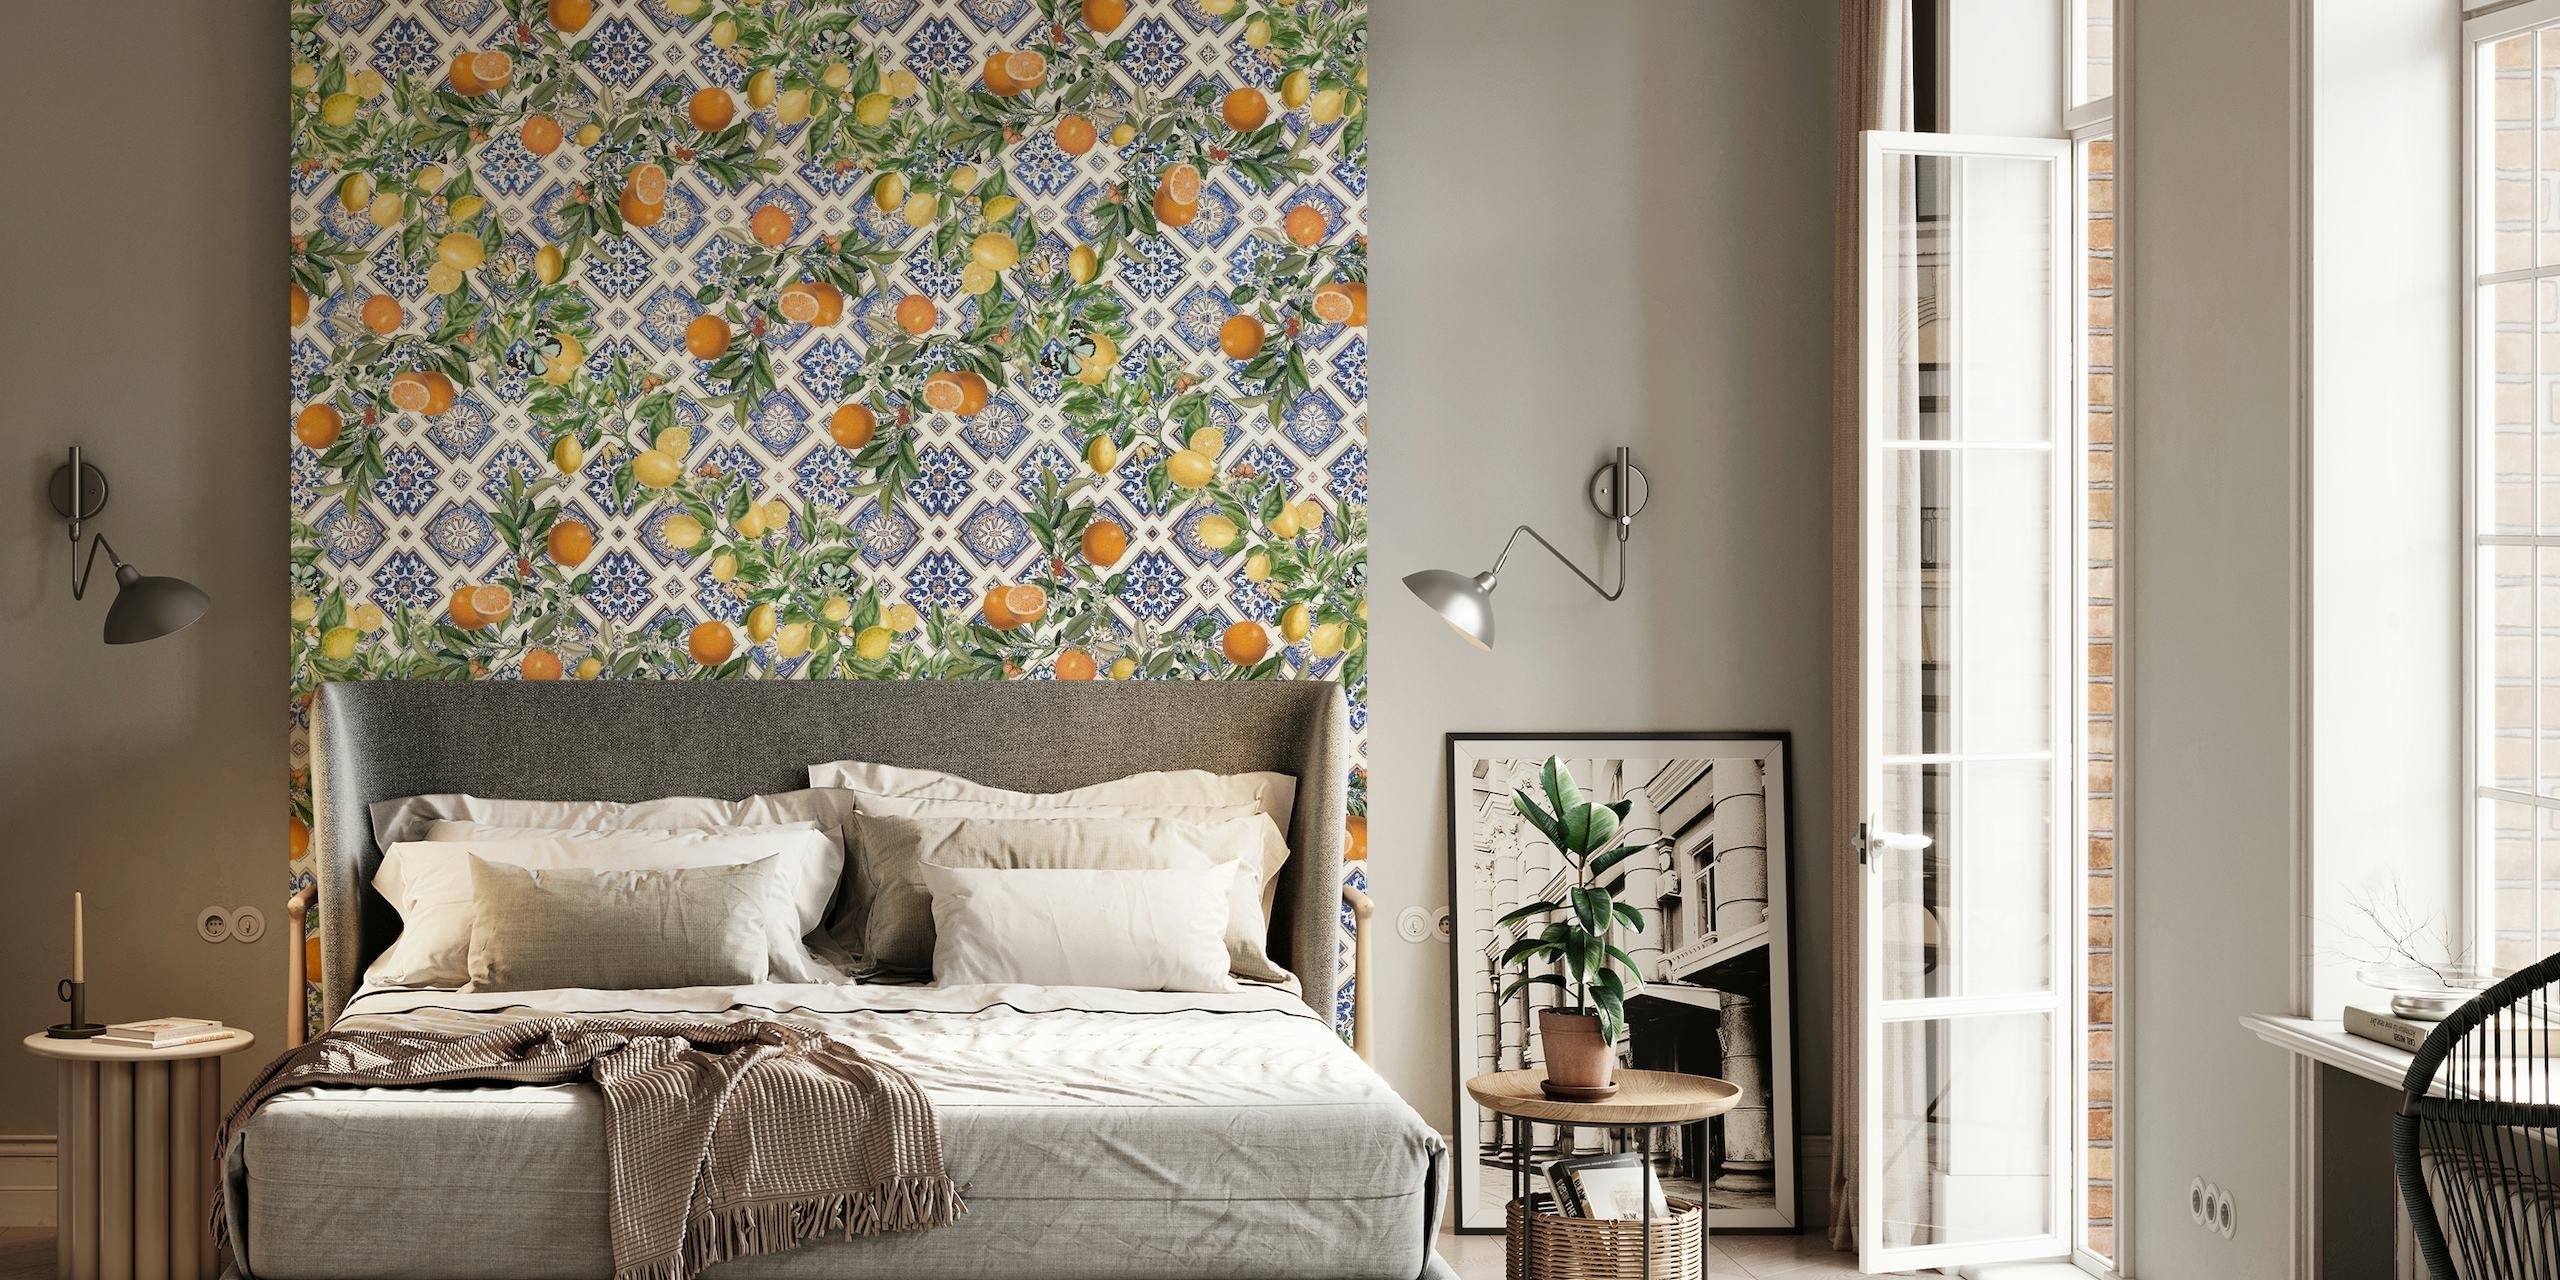 Sicilian Lemons and Oranges Wall Mural depicting bright citrus fruits intertwined with foliage.